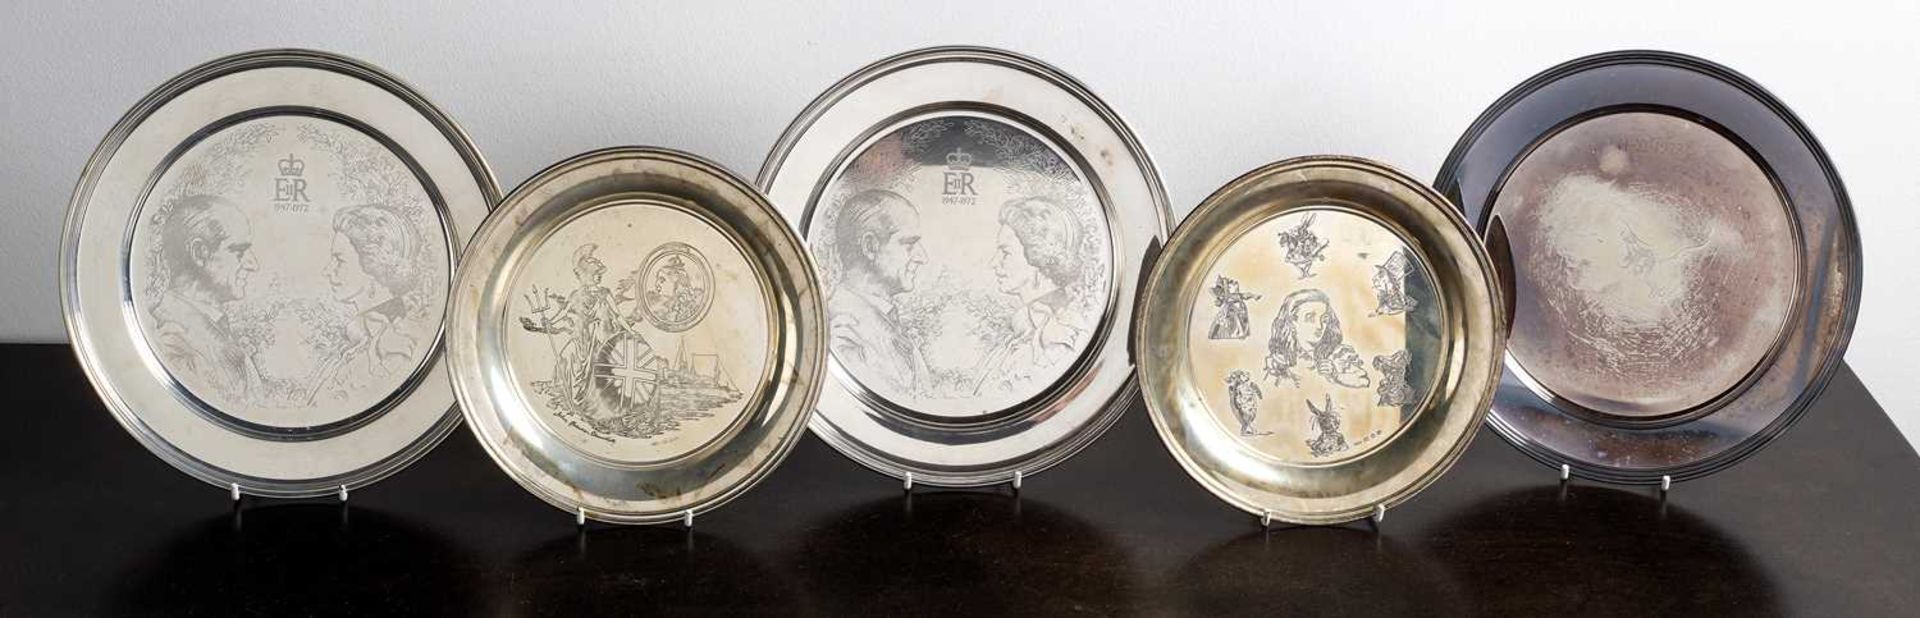 Collection of five commemorative silver limited edition presentation plates comprising of: a